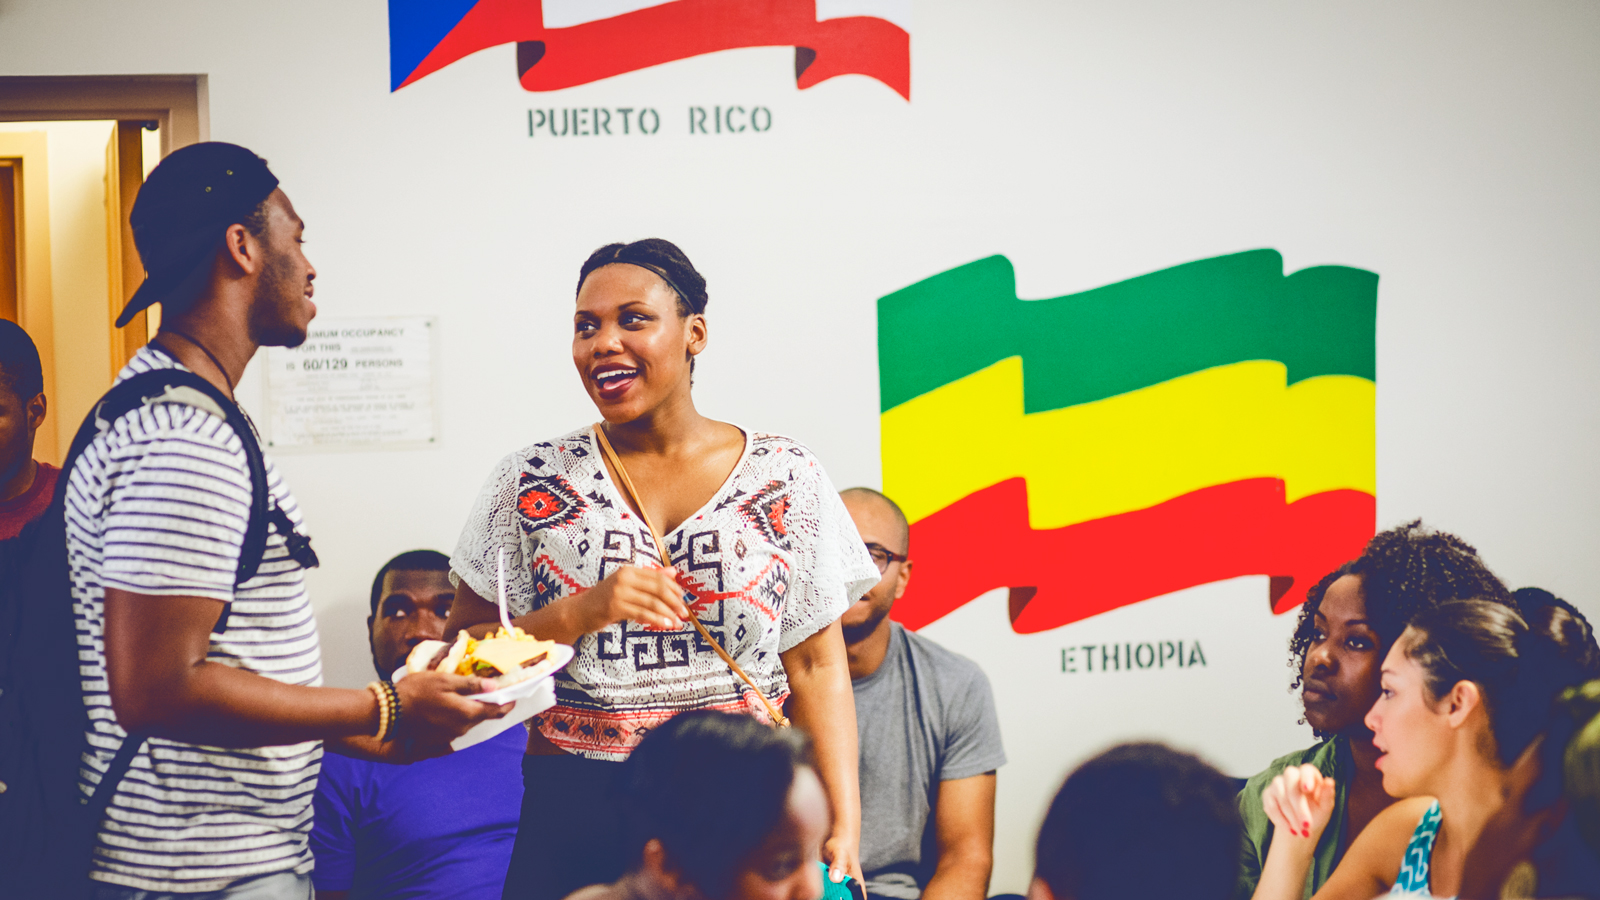 A group of people socialize in a room with the Puerto Rico and Ethiopia flags painted on the wall.